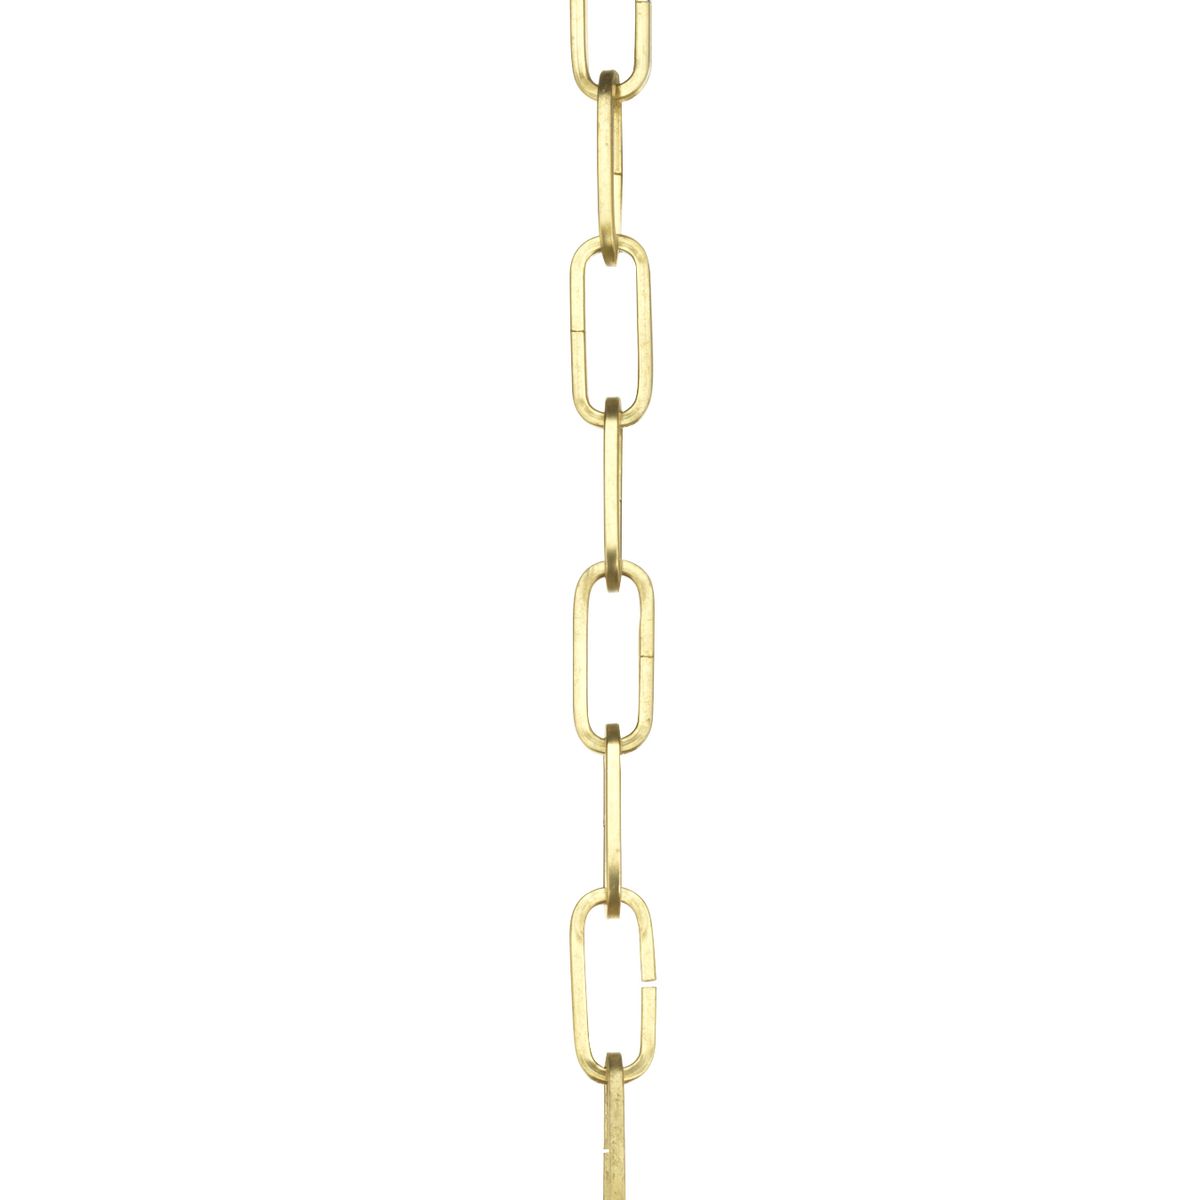 Ten feet of 9 gauge chain in Brushed Brass finish. Solid chain permits installation of chain-hung fixtures on high ceilings. Maximum fixture weight 50 lbs.